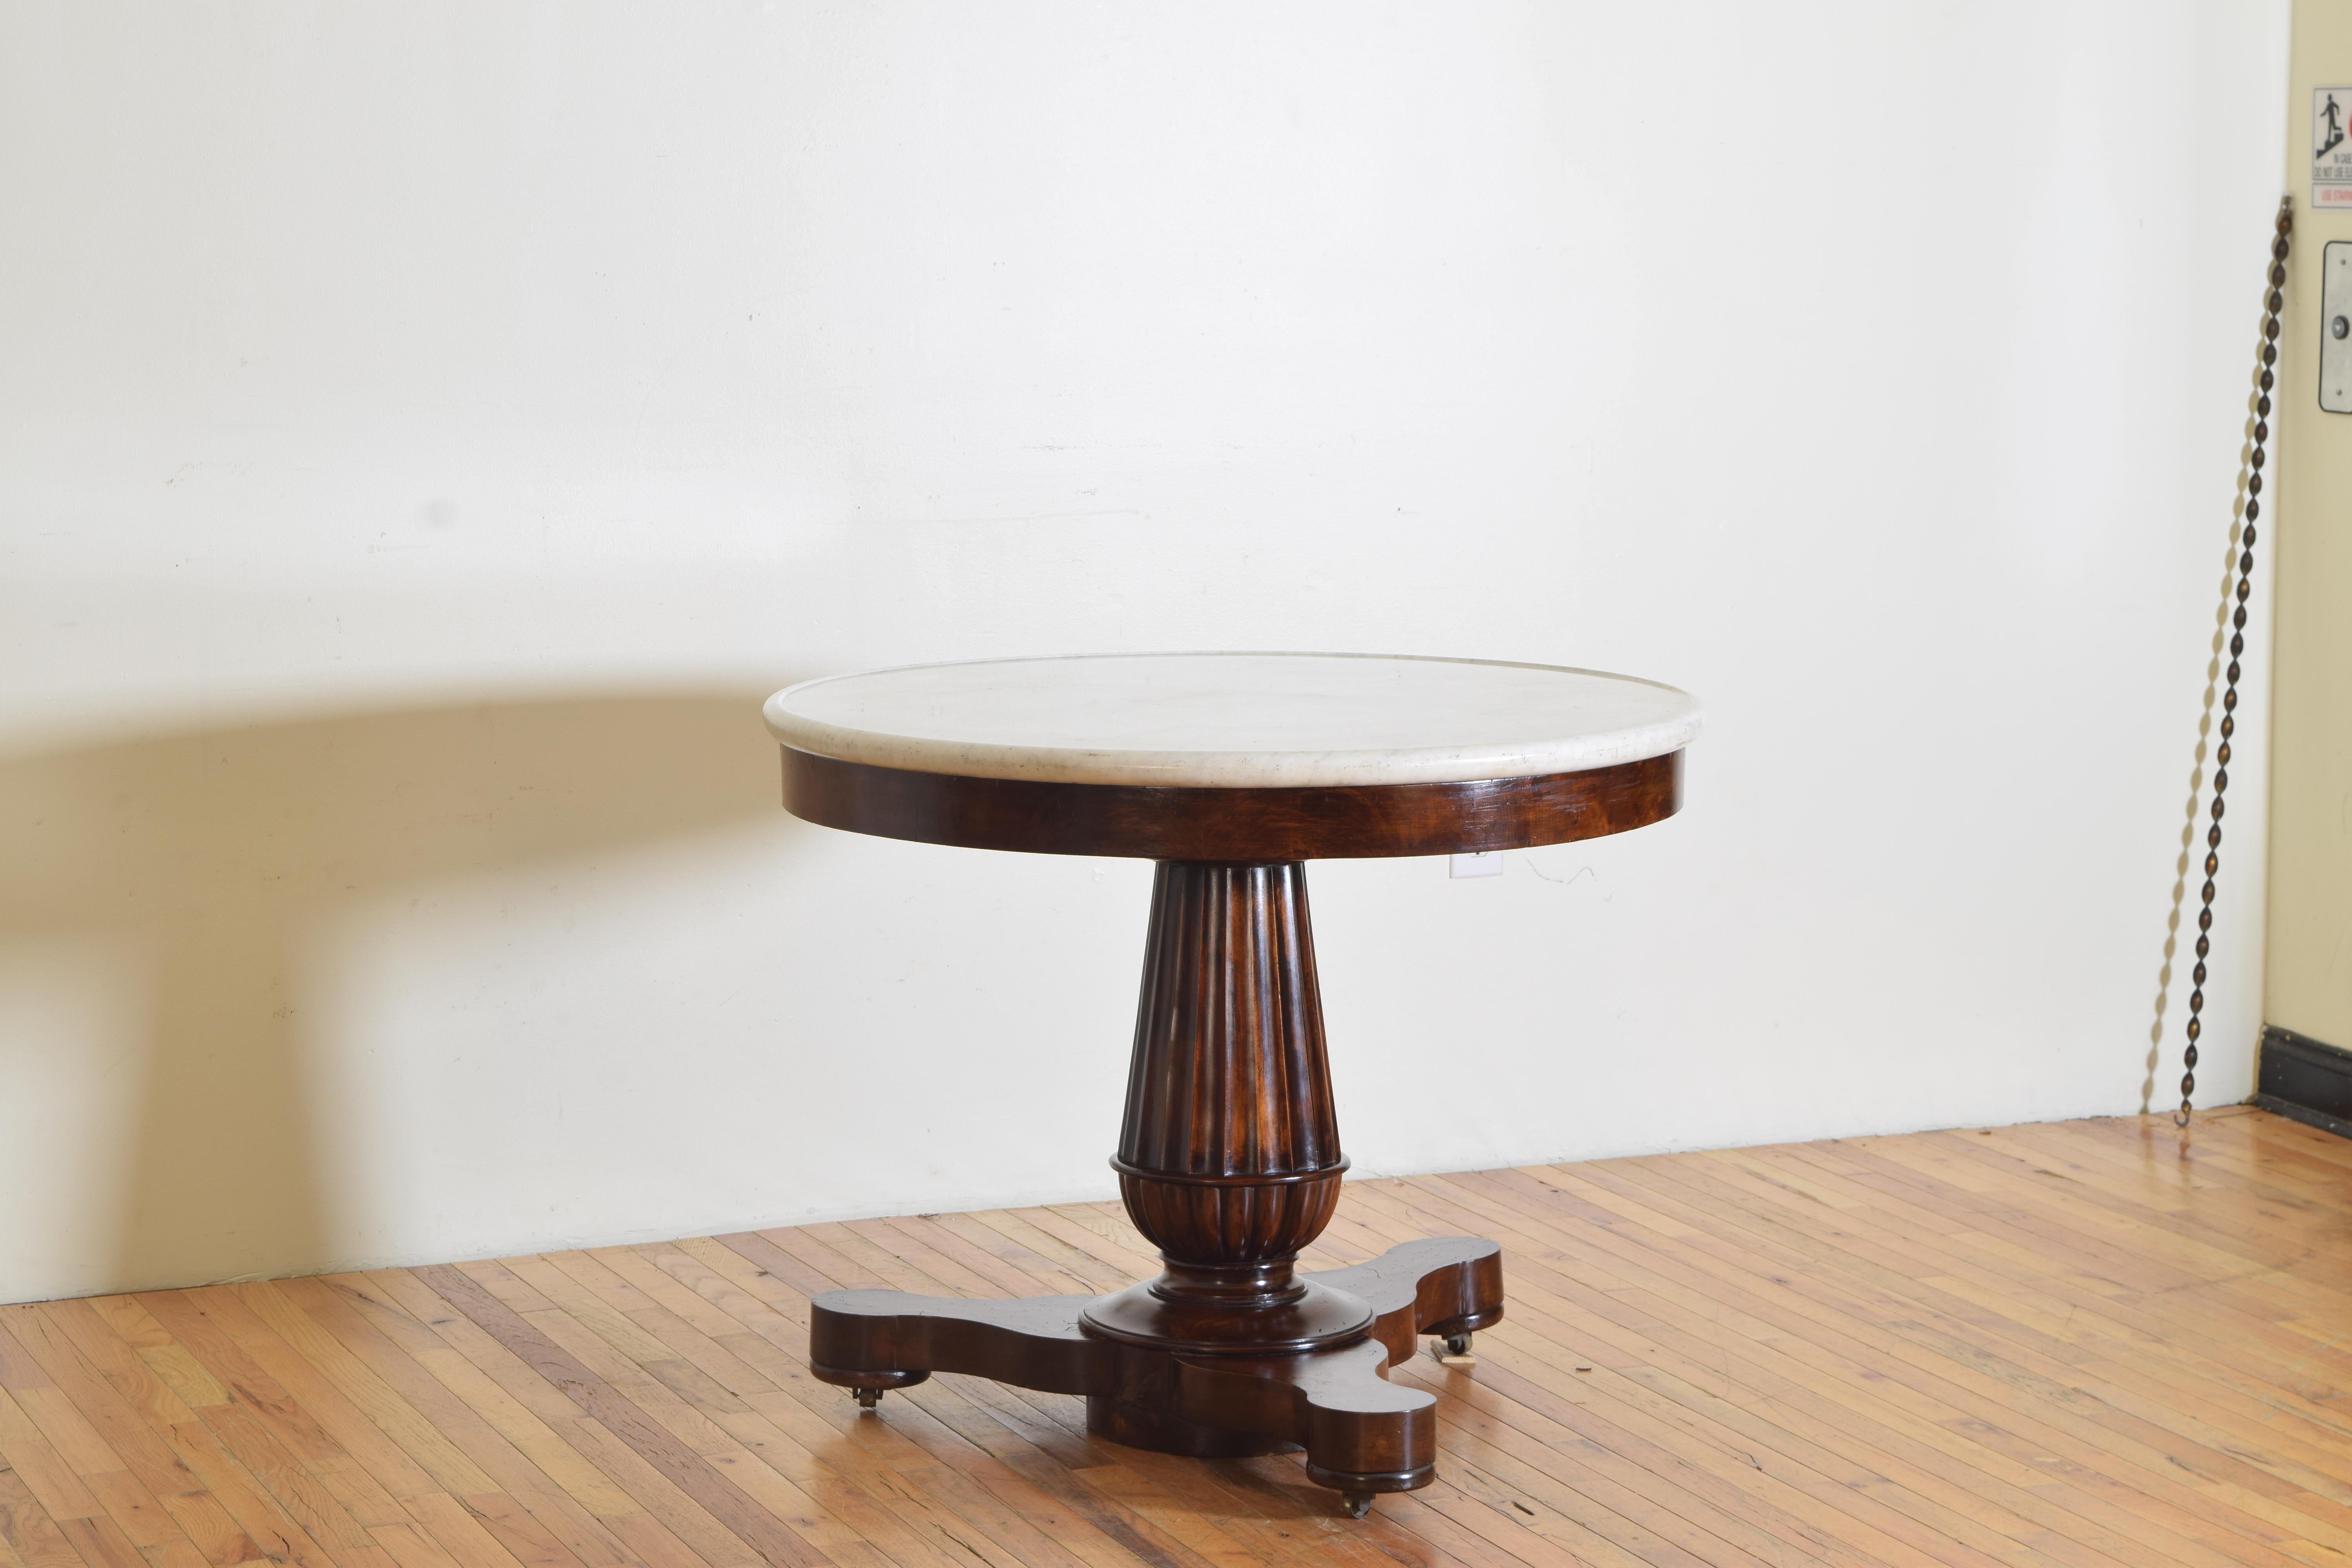 Neoclassical Northern Italian Neoclassic Shaped Walnut Center Table with Marble Top, ca. 1825